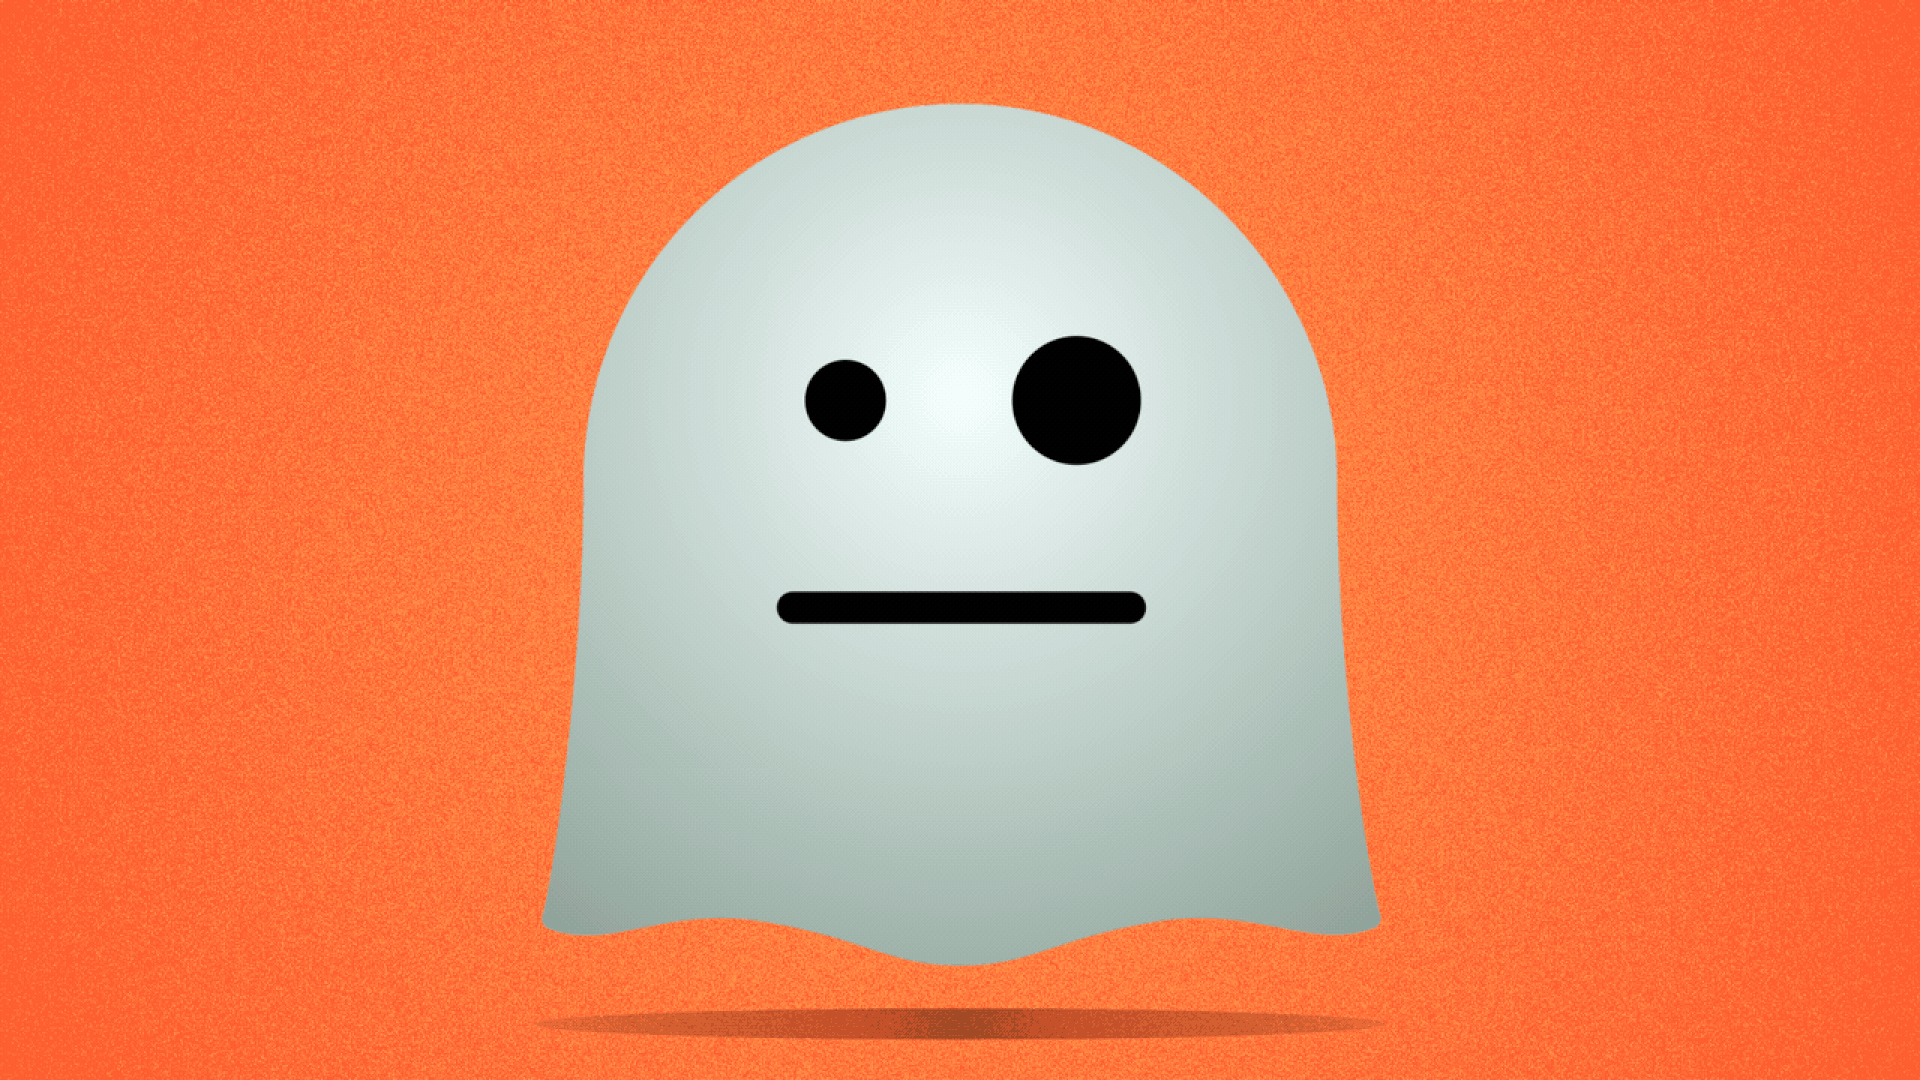 Illustration of an animated ghost emoji changing from a serious face to a smile, sticking its tongue out, and wearing sunglasses lowering its eyes. 